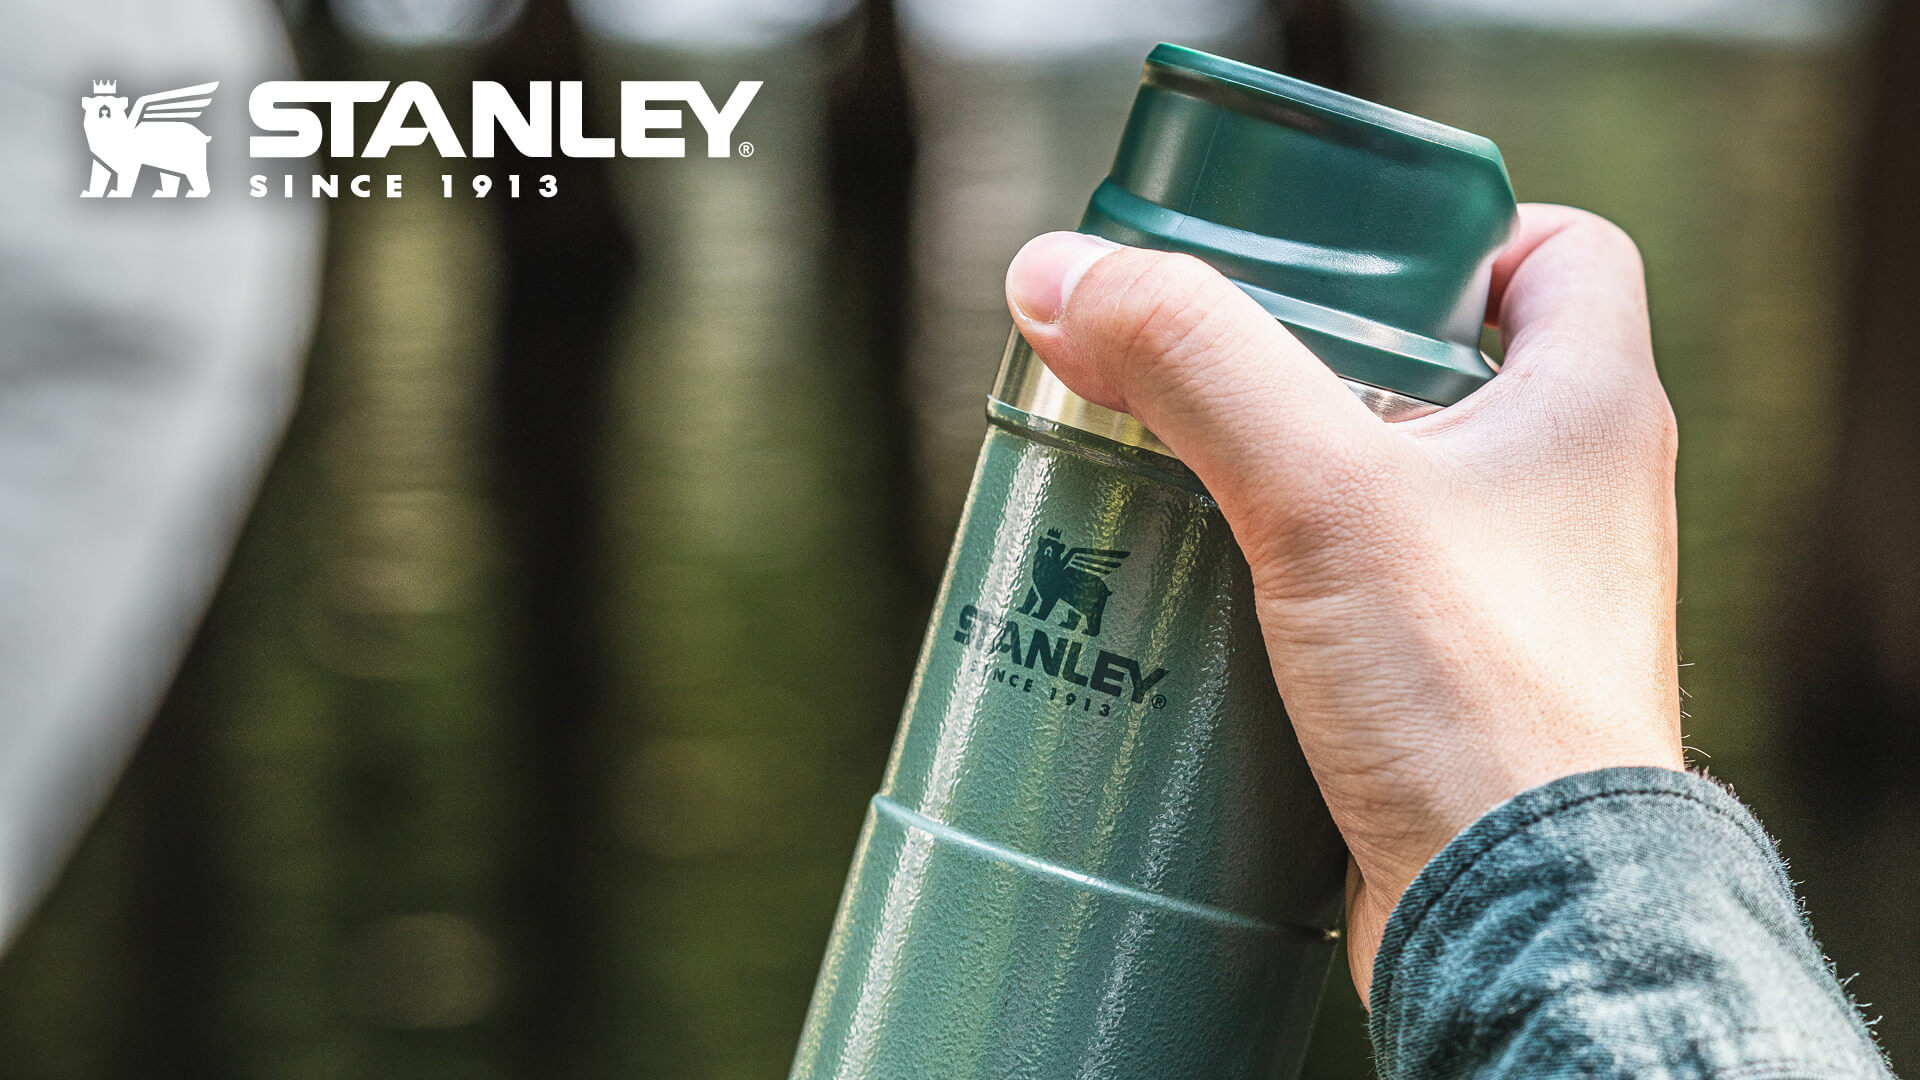 Stanley-Banners-1920-x-1080-px-21_5.jpg